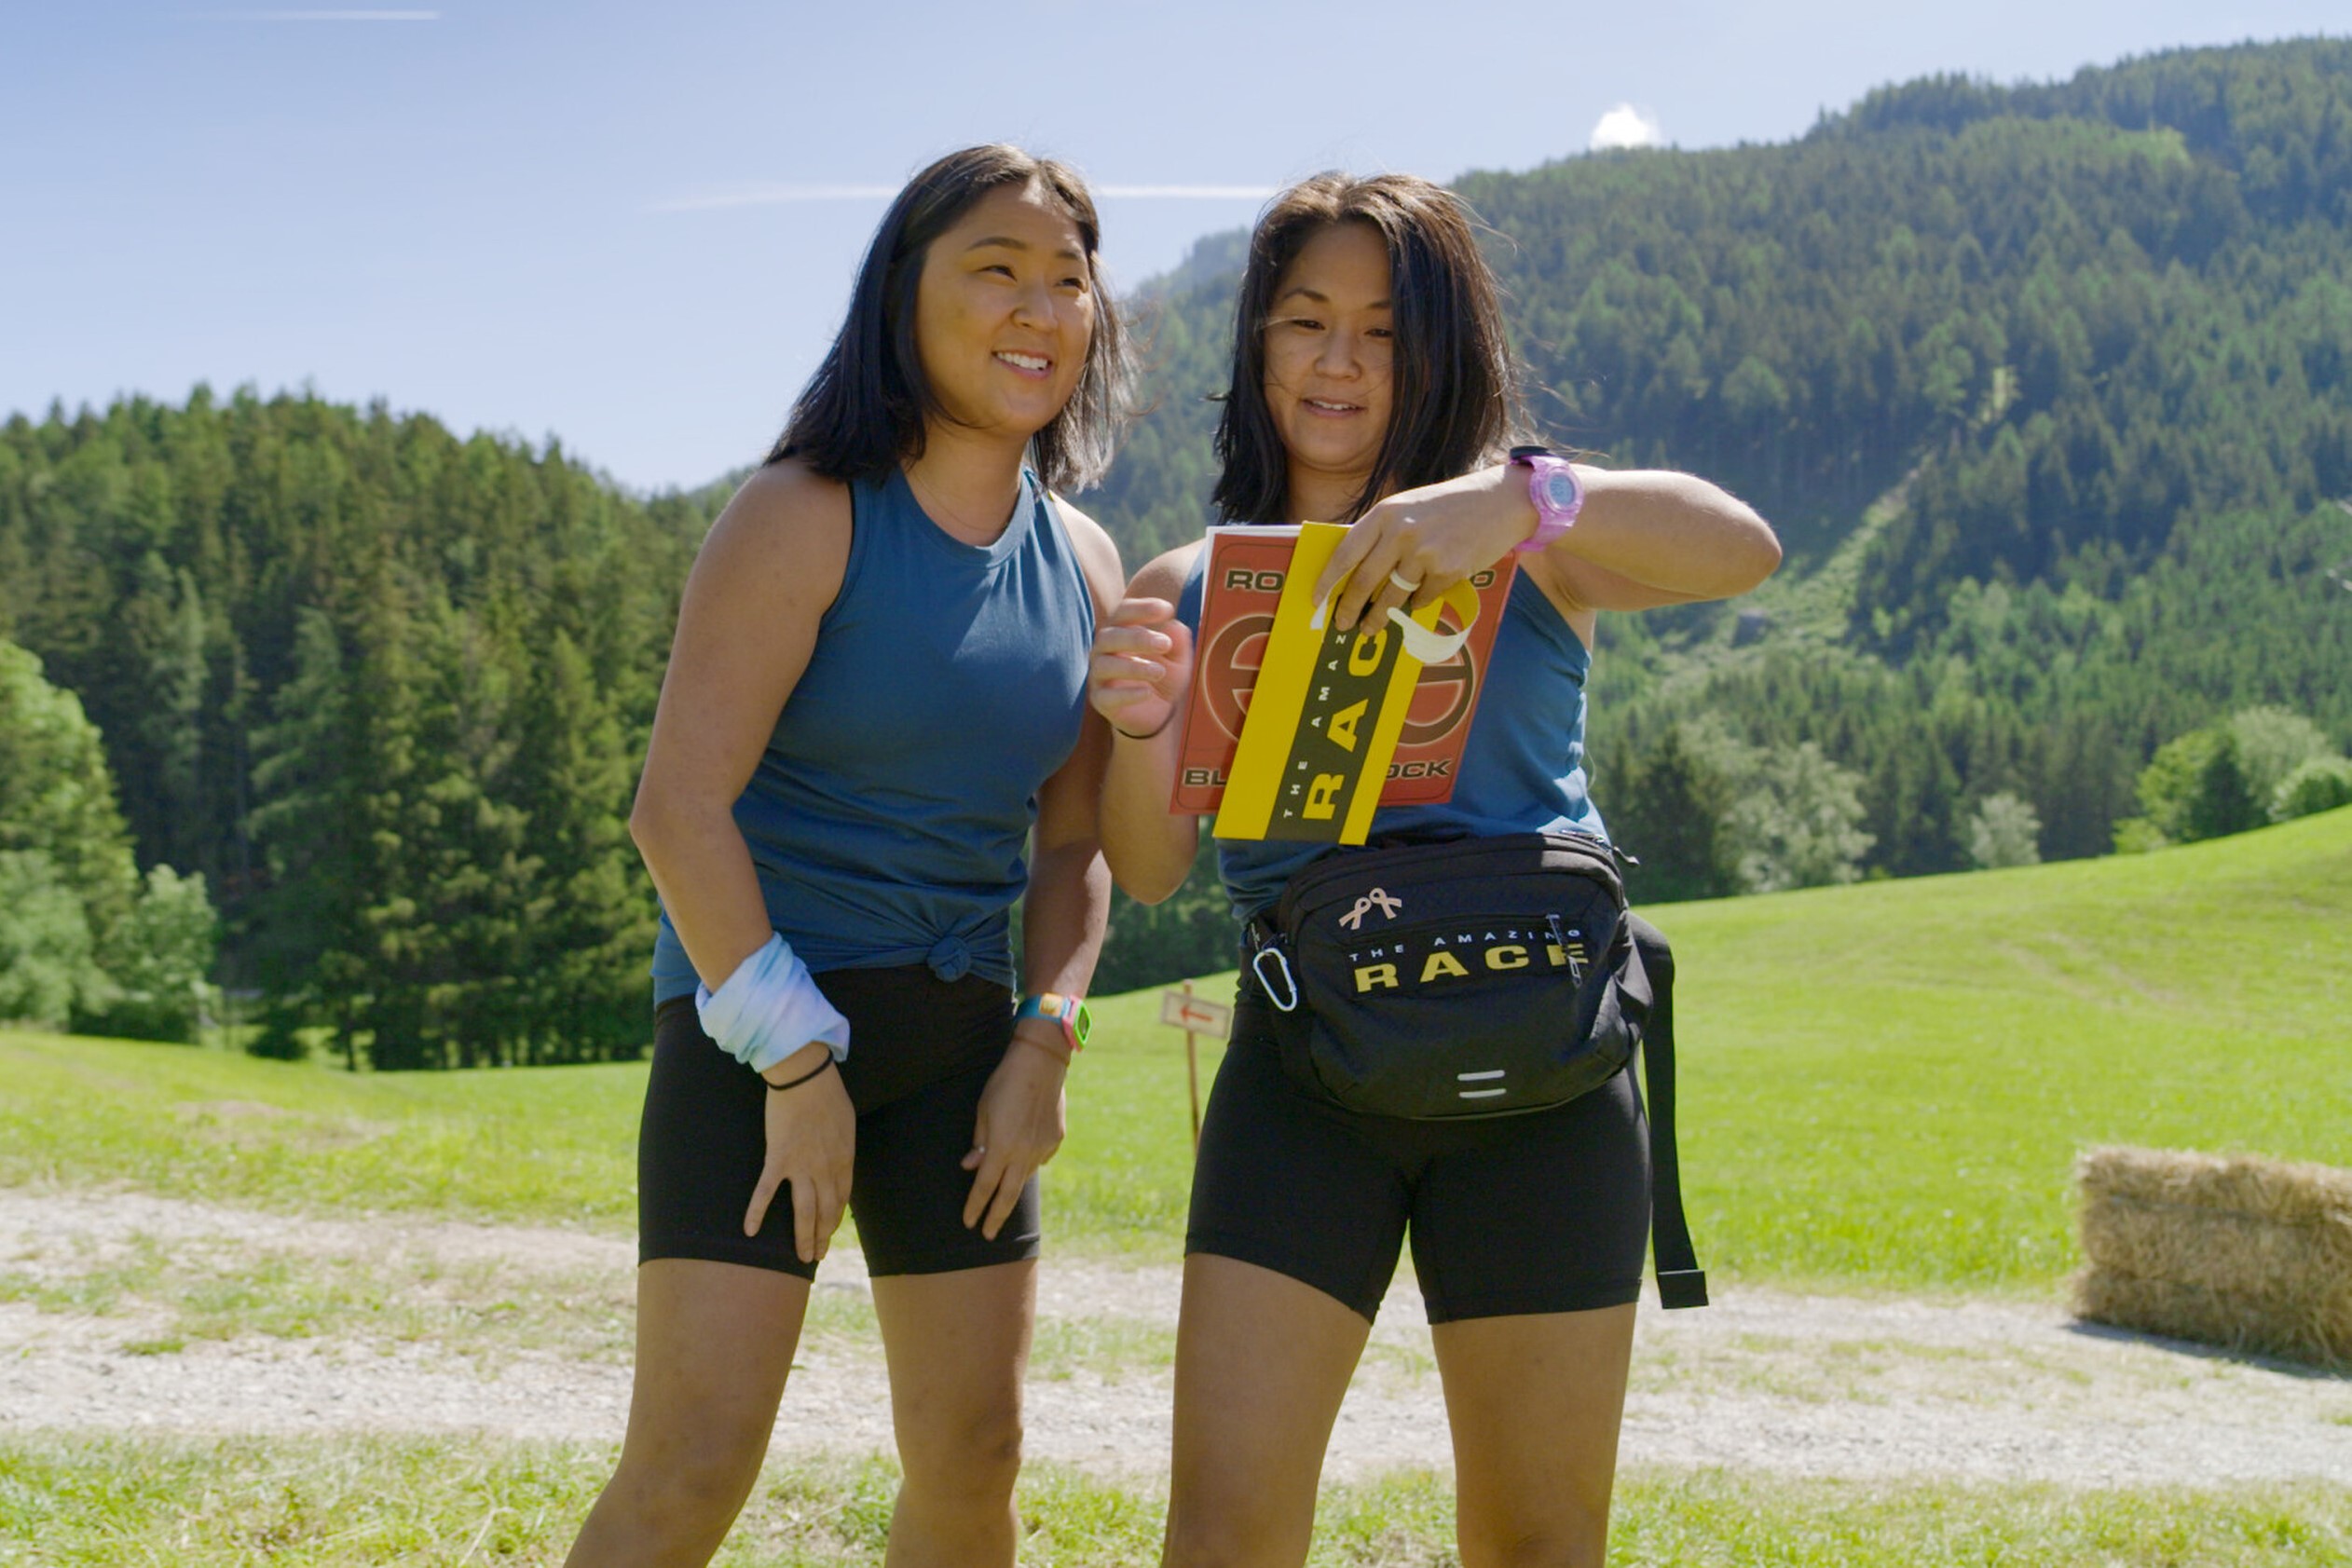 Emily Bushnell and Molly Sinert, who star in 'The Amazing Race' Season 34, which foregoes a historic twist, read a clue. The twins wear dark blue tank tops and black biker shorts.